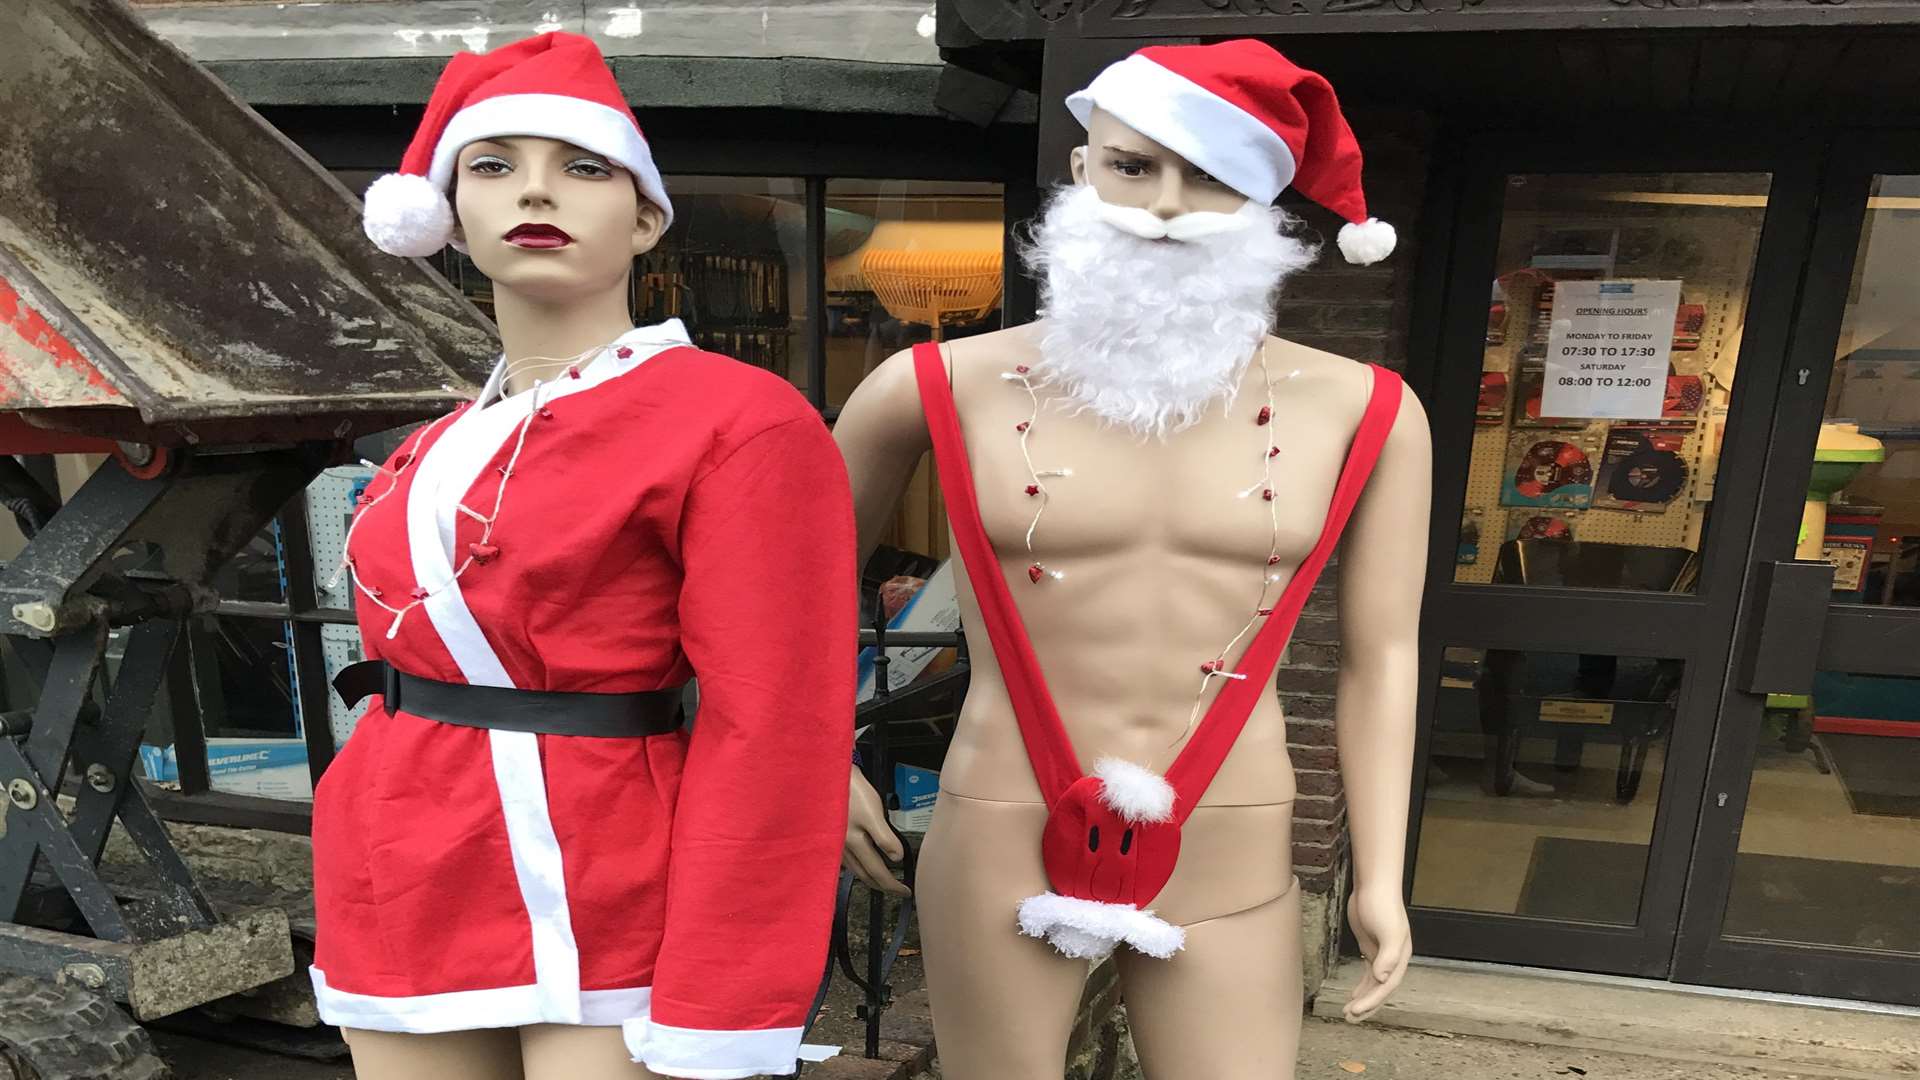 The sexy Santa mannequins prompted a visit from police. Picture: Richard Phipps